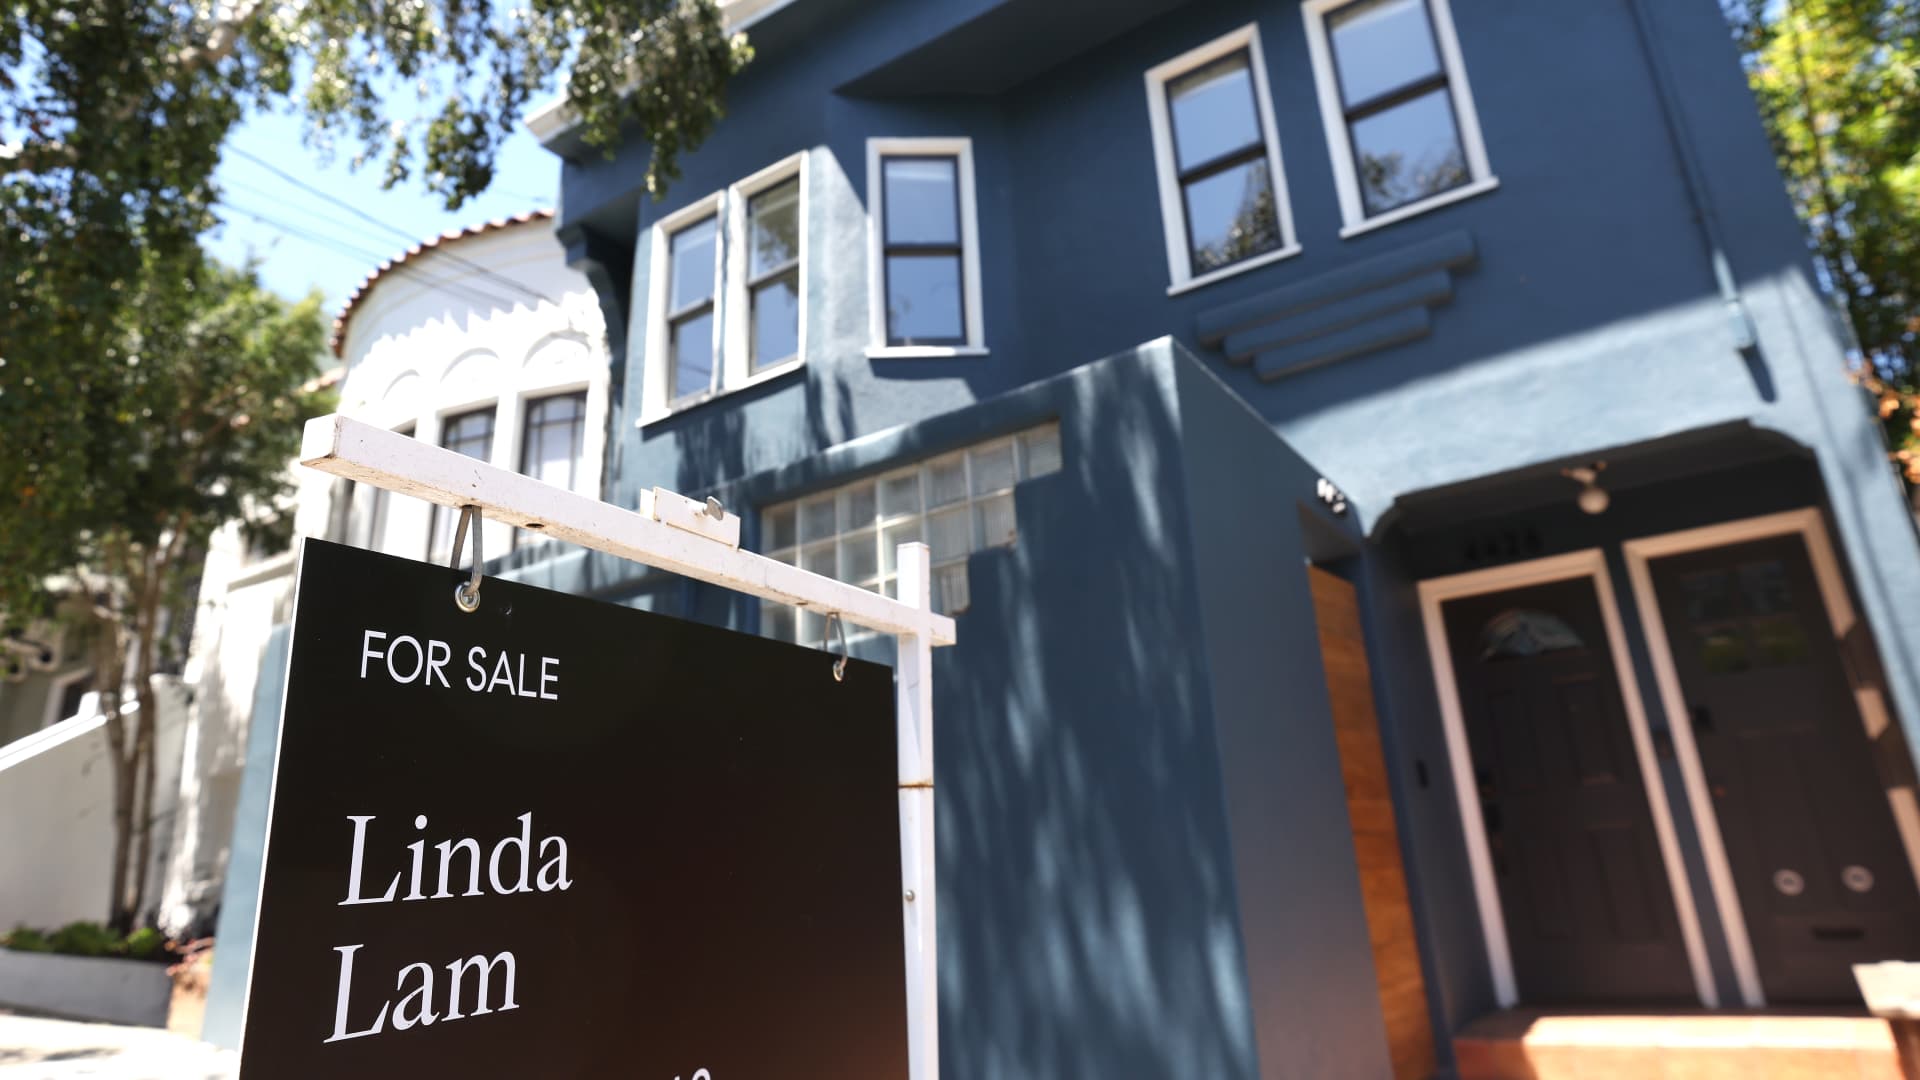 Home prices cooled at a record pace in June, according to housing data firm - CNBC